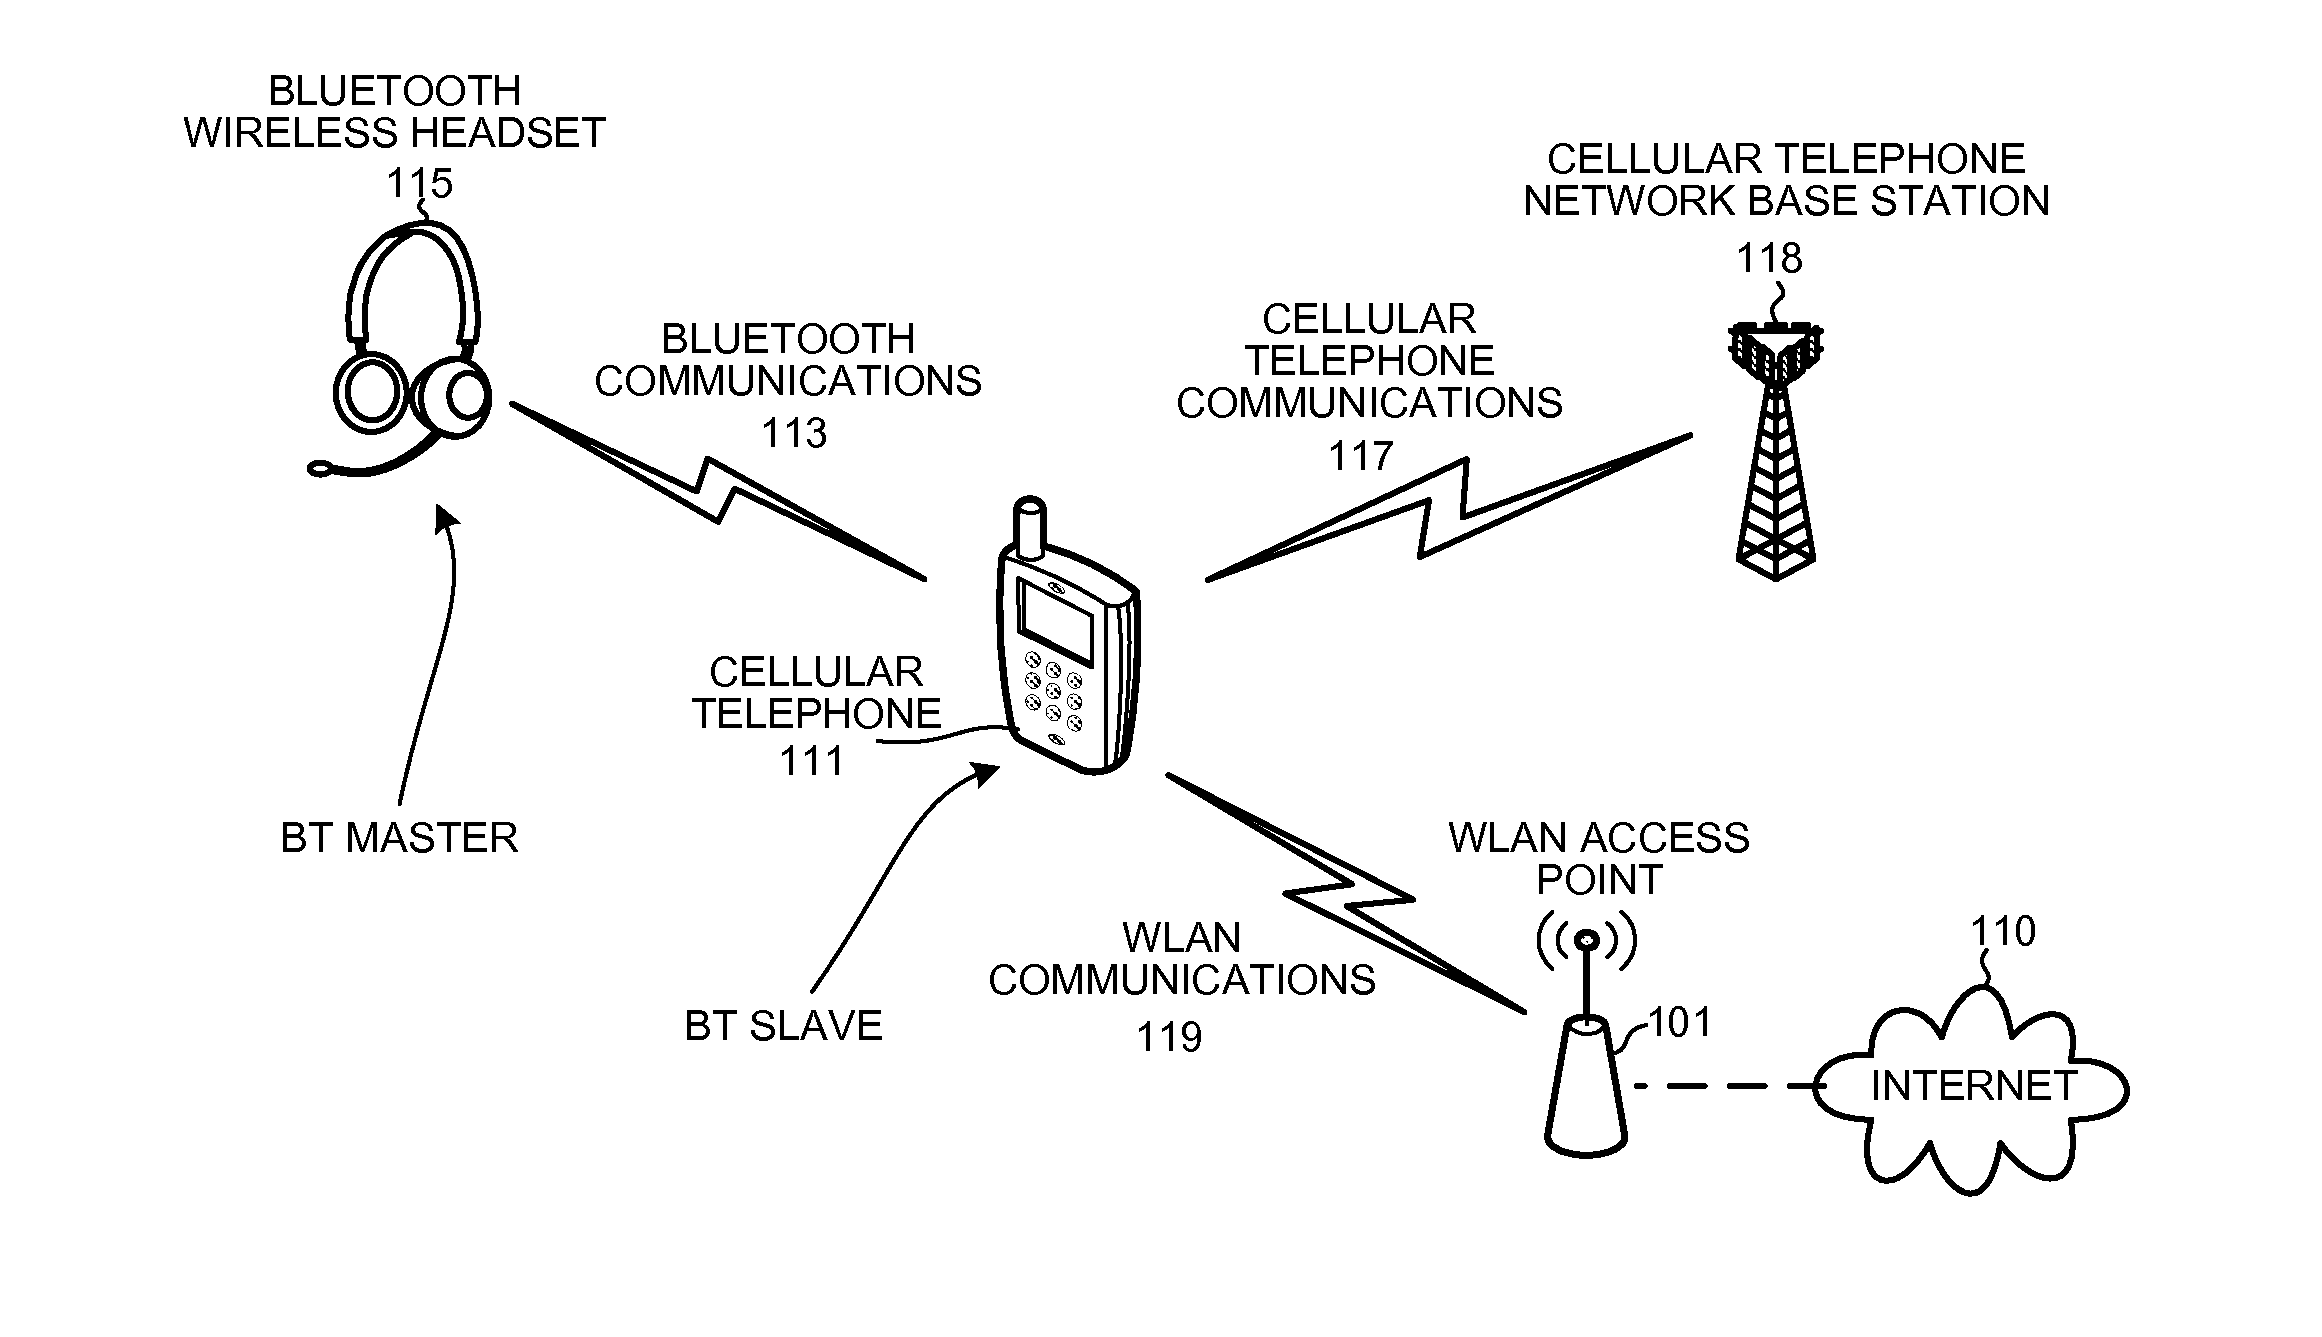 Detecting a WLAN signal using a bluetooth receiver during bluetooth scan activity